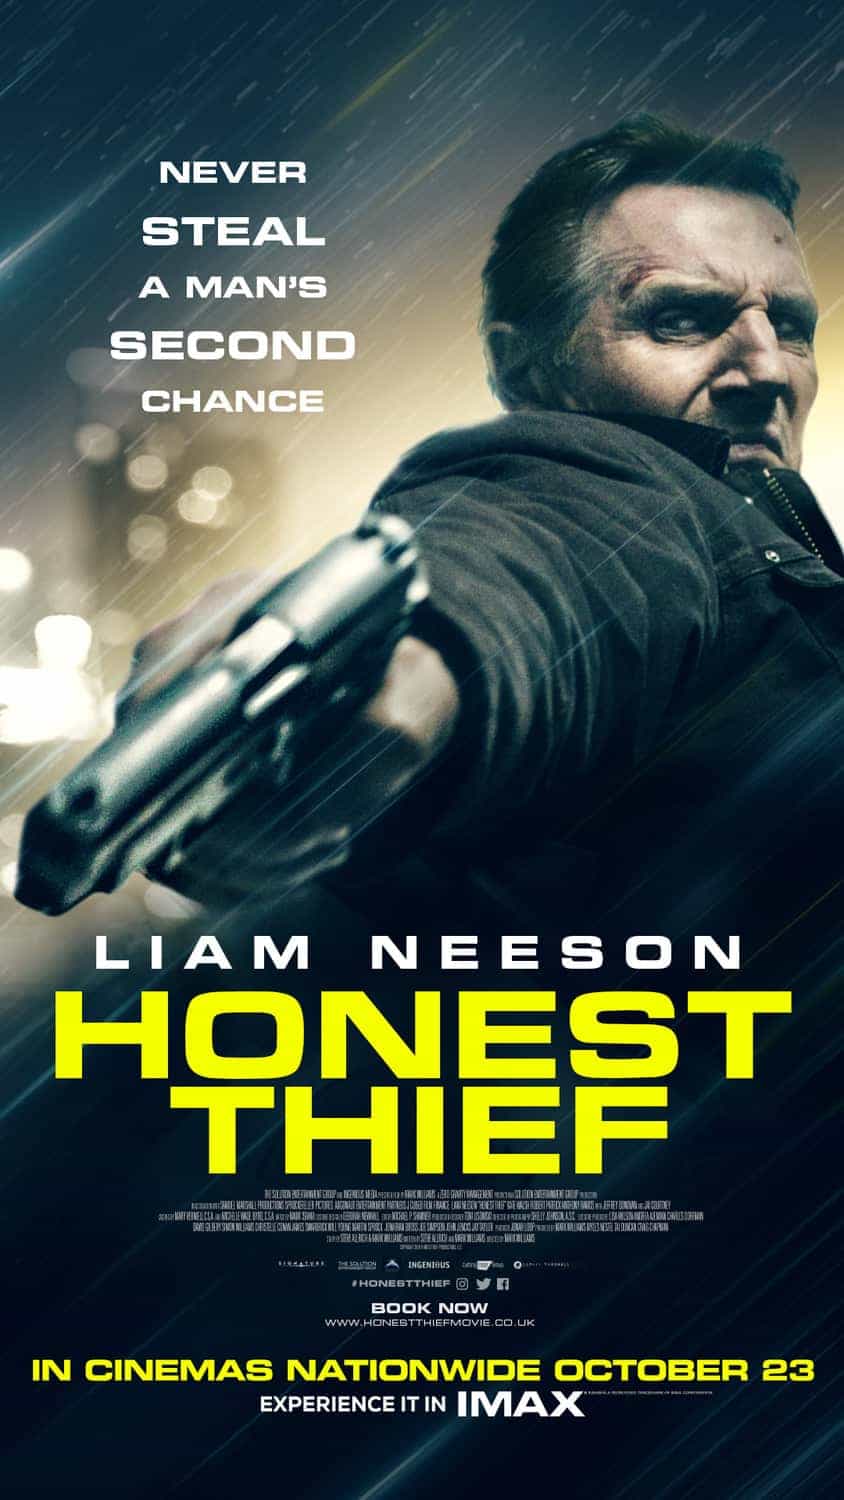 Honest Thief starring Liam Neeson is given a 15 age rating for Strong Violence